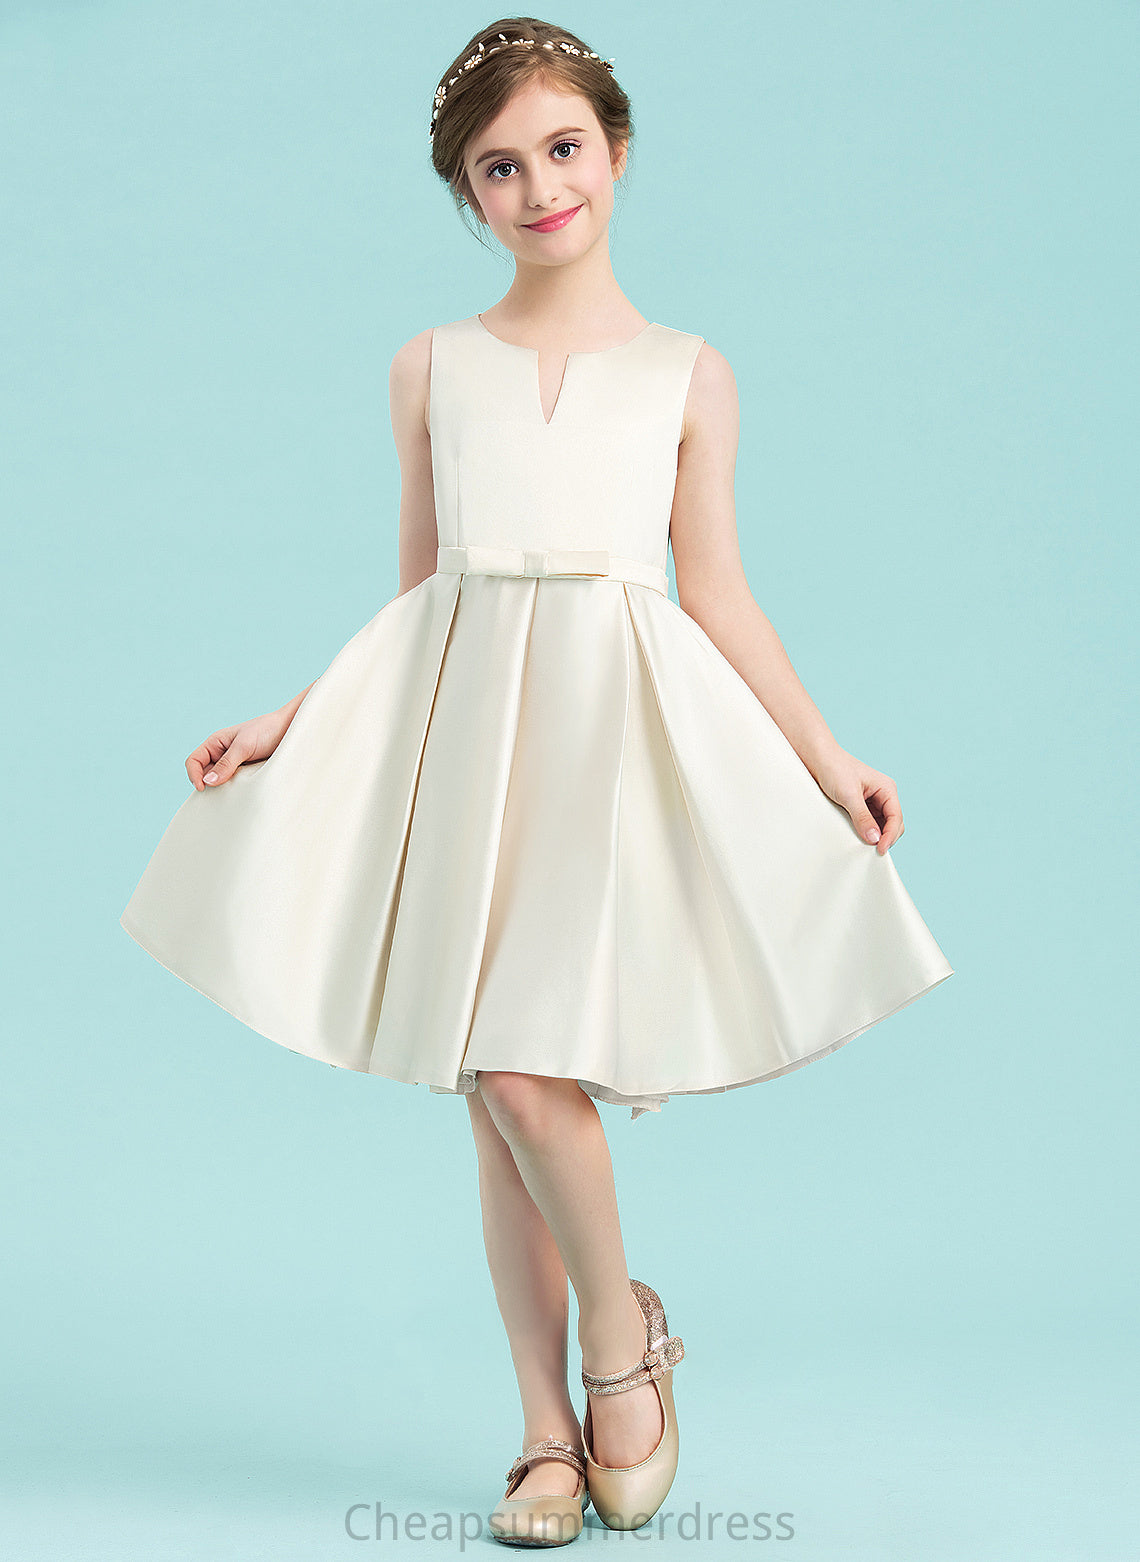 Scoop A-Line Julia Neck Junior Bridesmaid Dresses With Bow(s) Knee-Length Satin